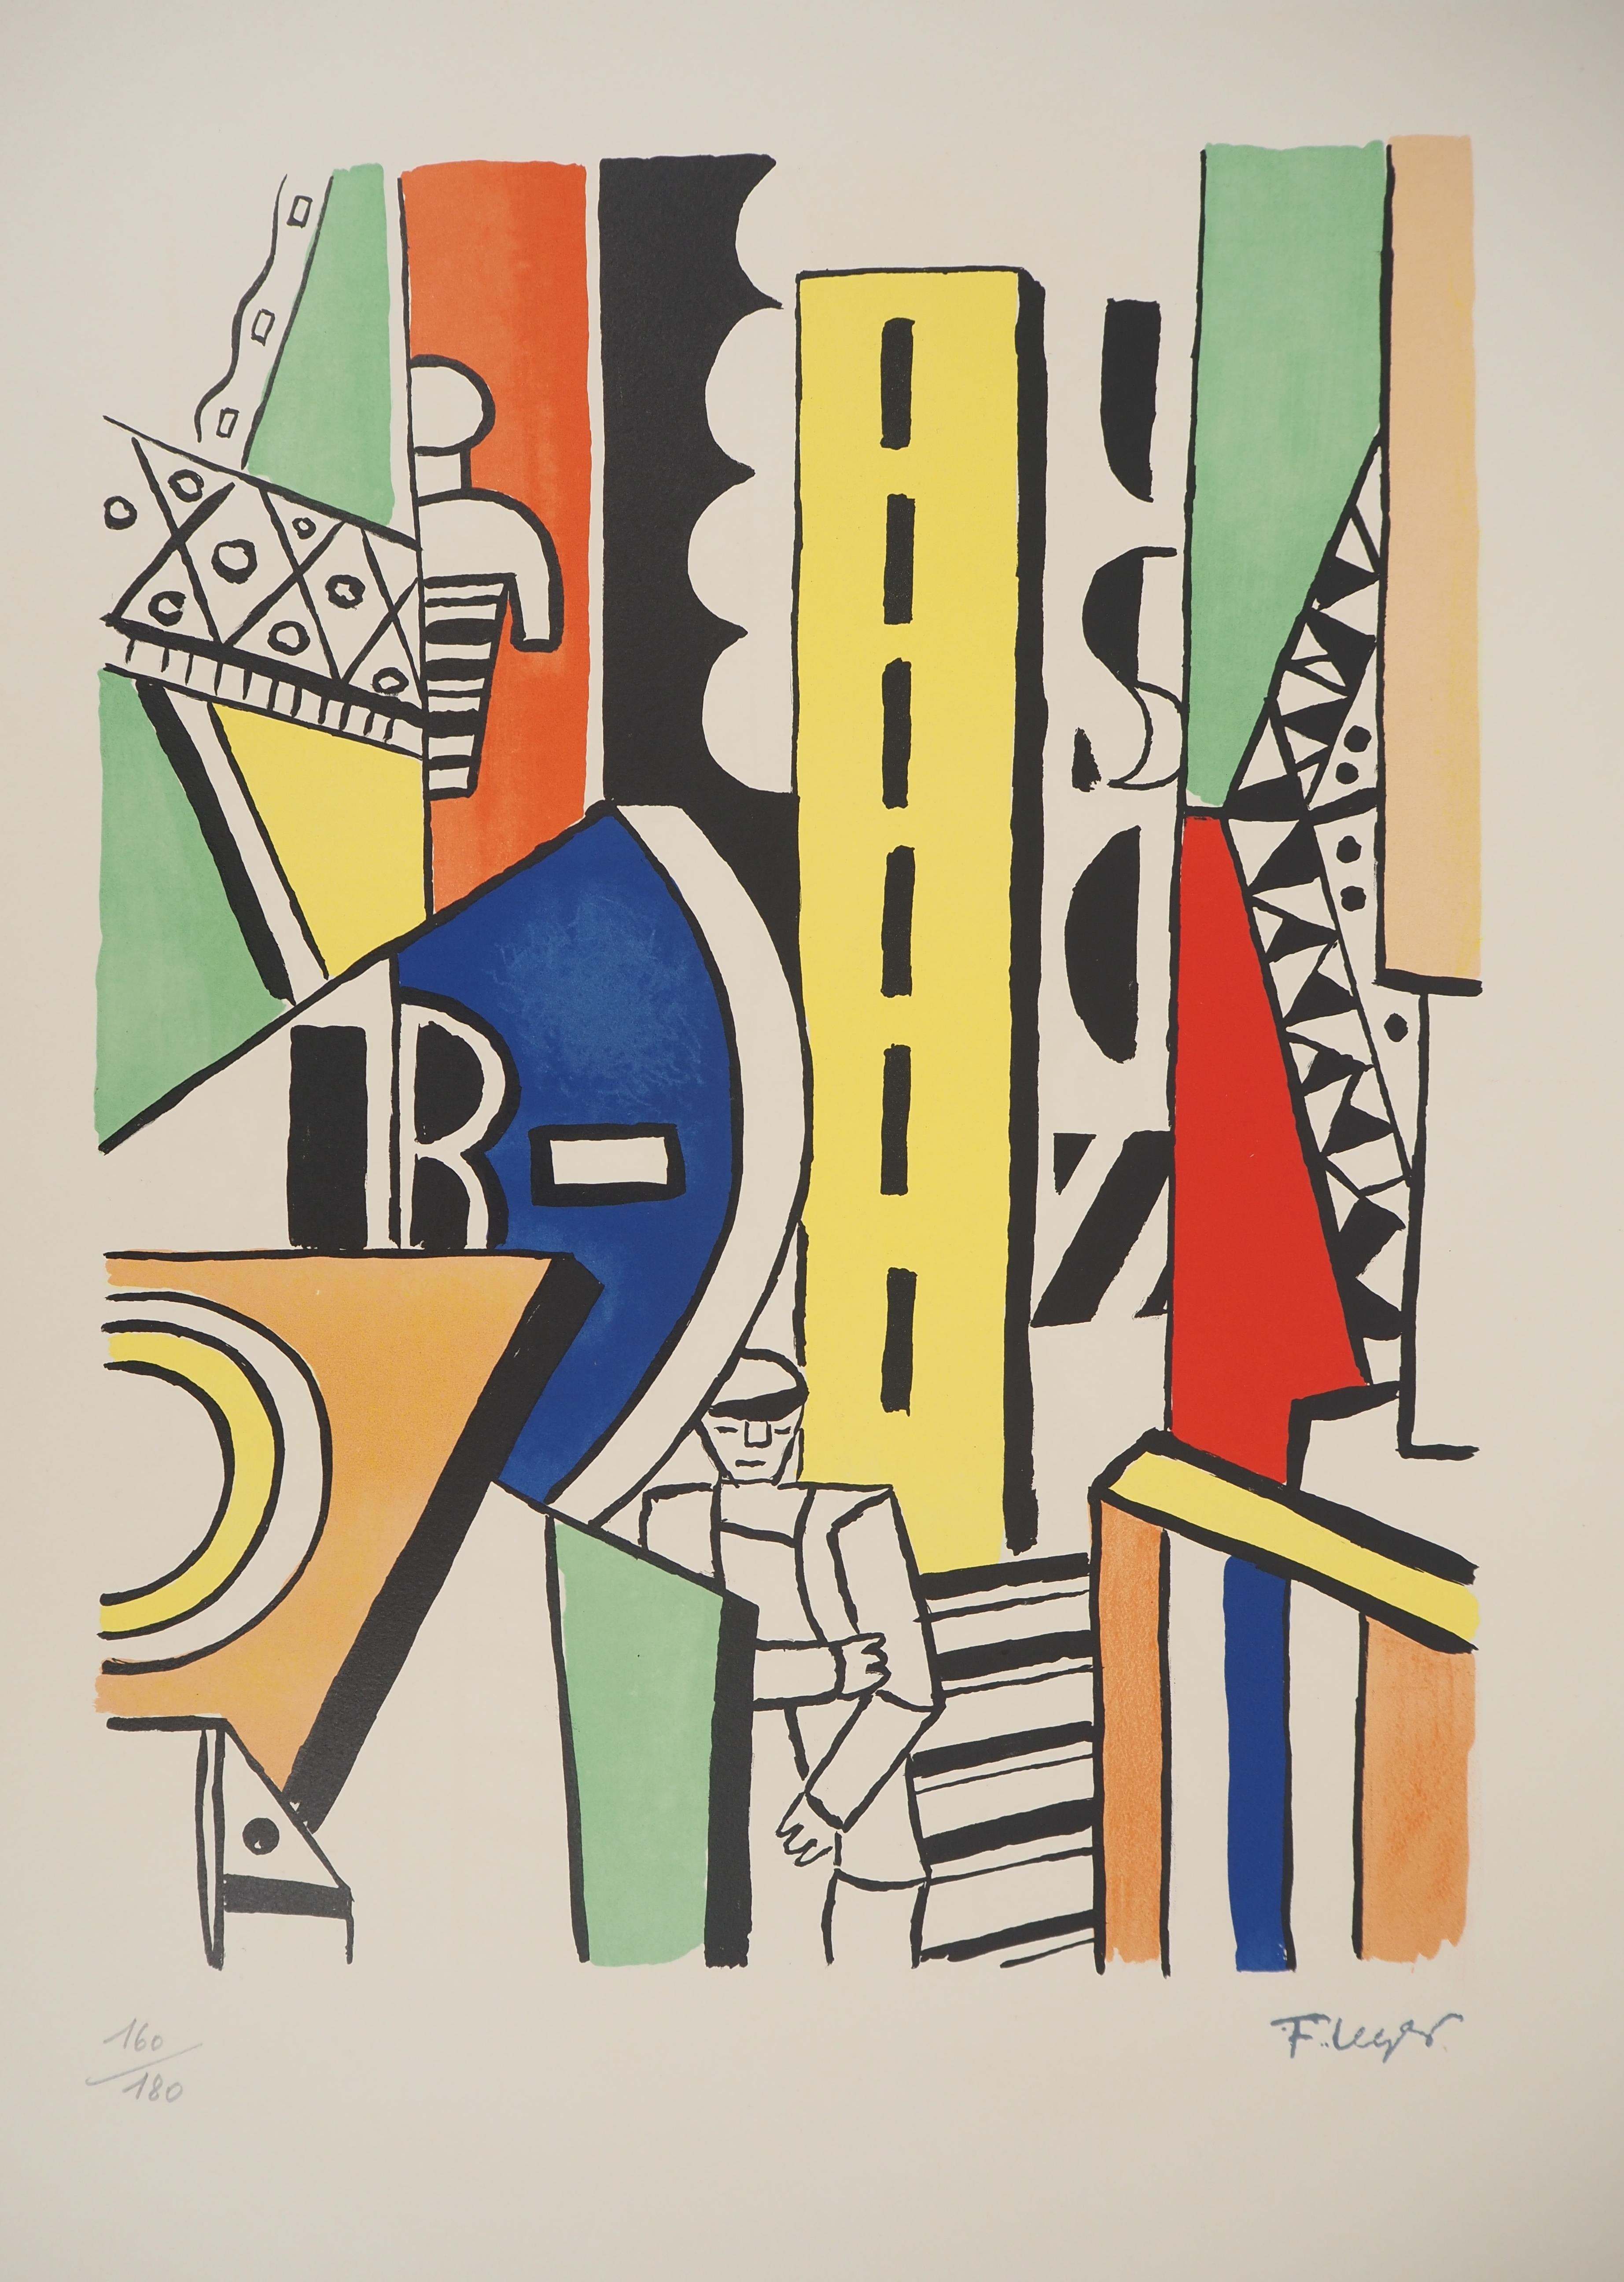 The city : Man in the city - Original lithograph, HANDSIGNED, 1959 - Modern Print by Fernand Léger